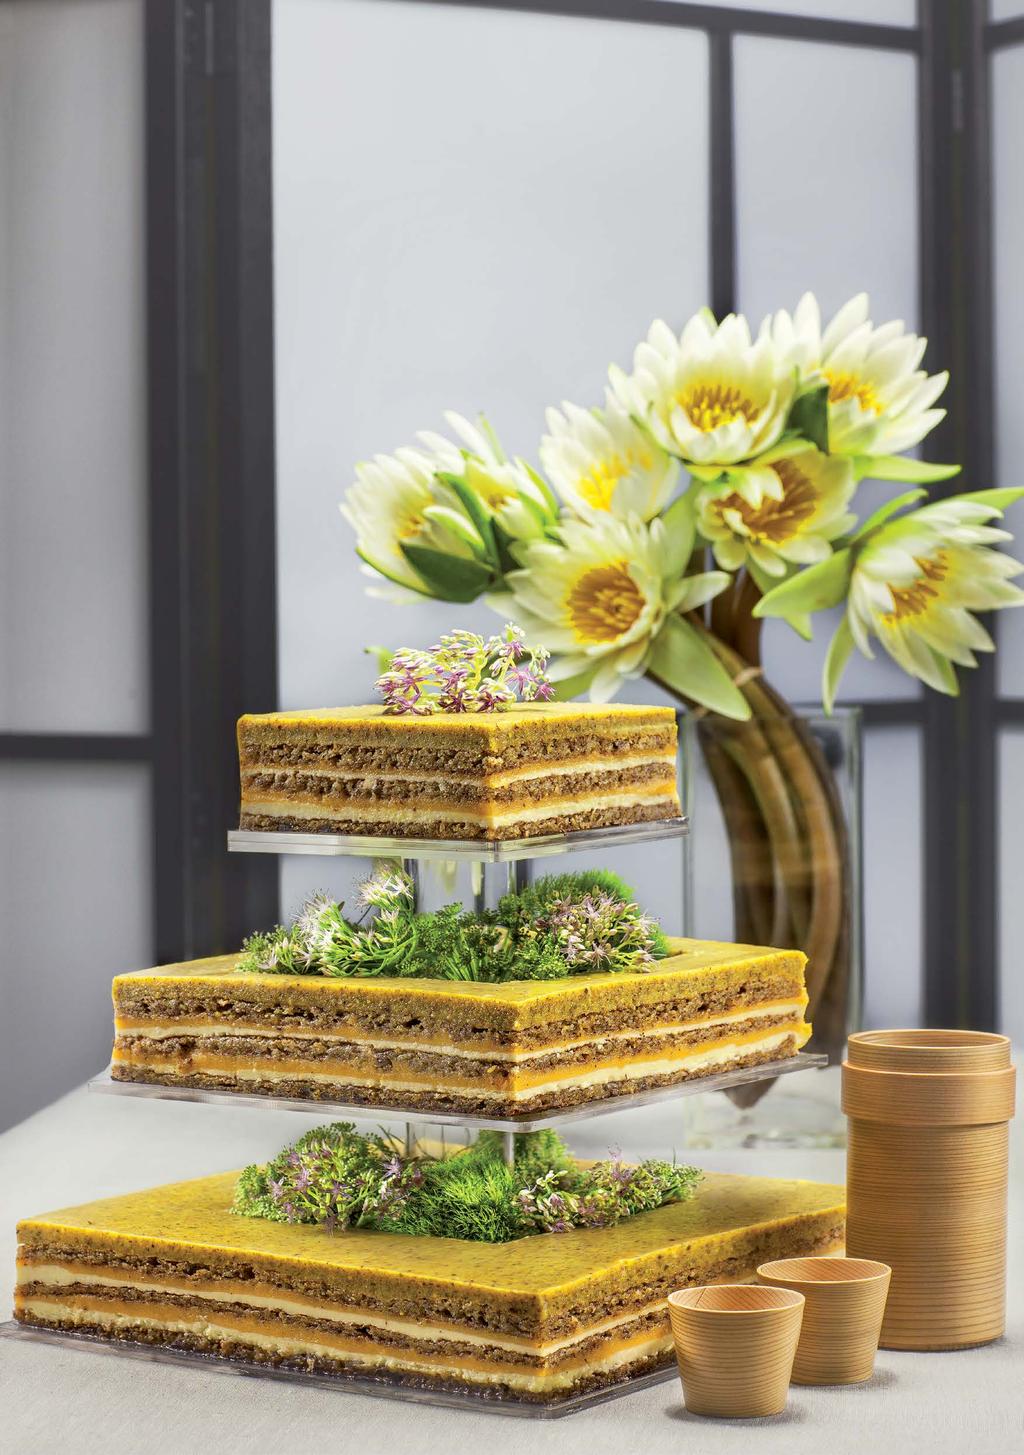 PISTACHIO LEMON ZEN CAKE PISTACHIO LEMON ZEN CAKE Flowers by Flower Room, Darlinghurst Inspired by spring citrus, the Zen cake is built from layers of pistachio ganache, white chocolate mousse, lemon